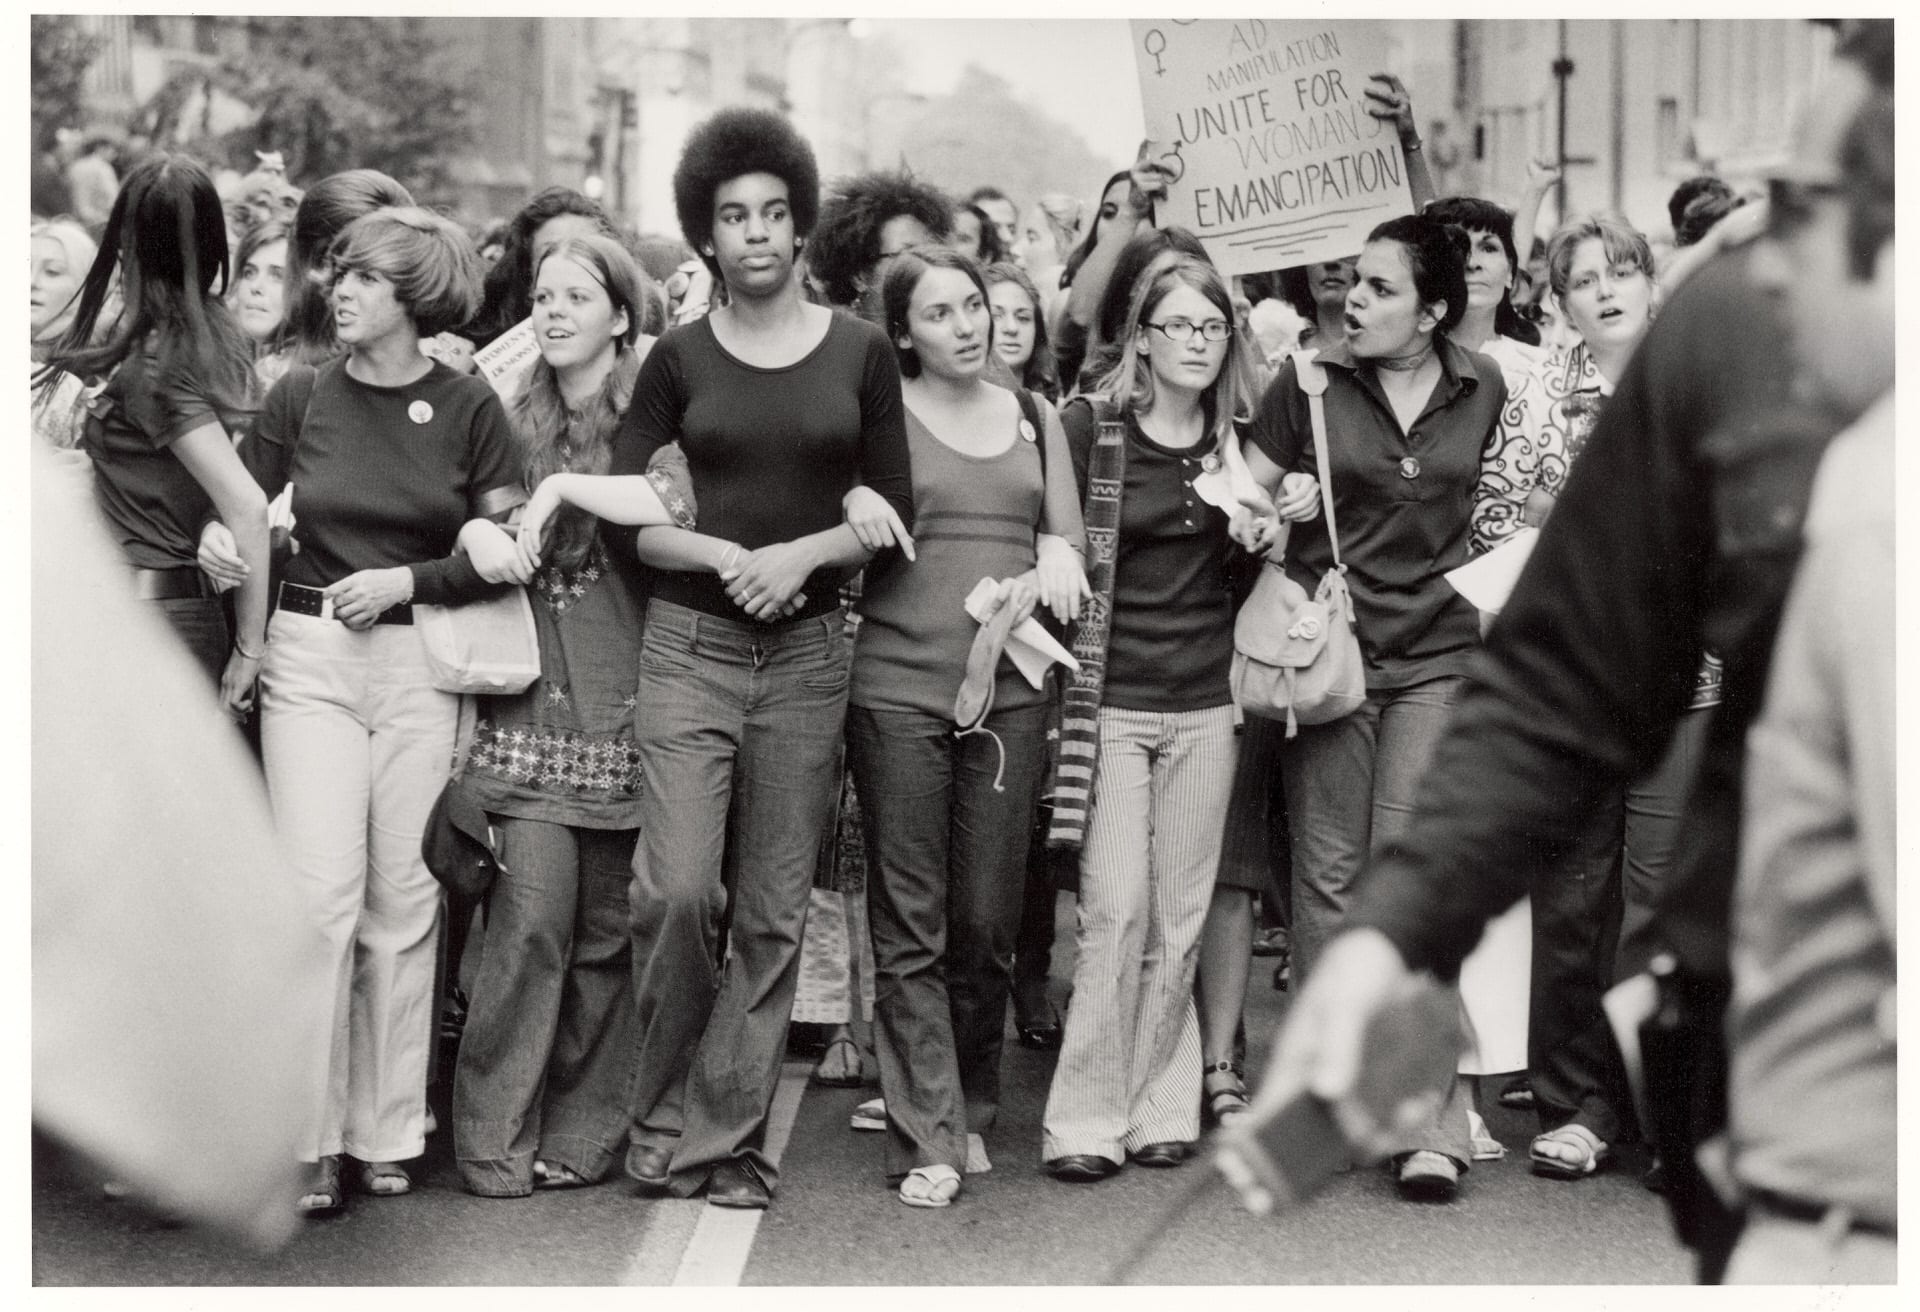 Enthusiastic and resolute women in large parade down Fifth Avenue on the 50th anniversary of the passage of the 19th Ammendment, which granted the women the right to vote, as they march for further women's rights. (Photo by John Olson/The LIFE Picture Collection via Getty Images)